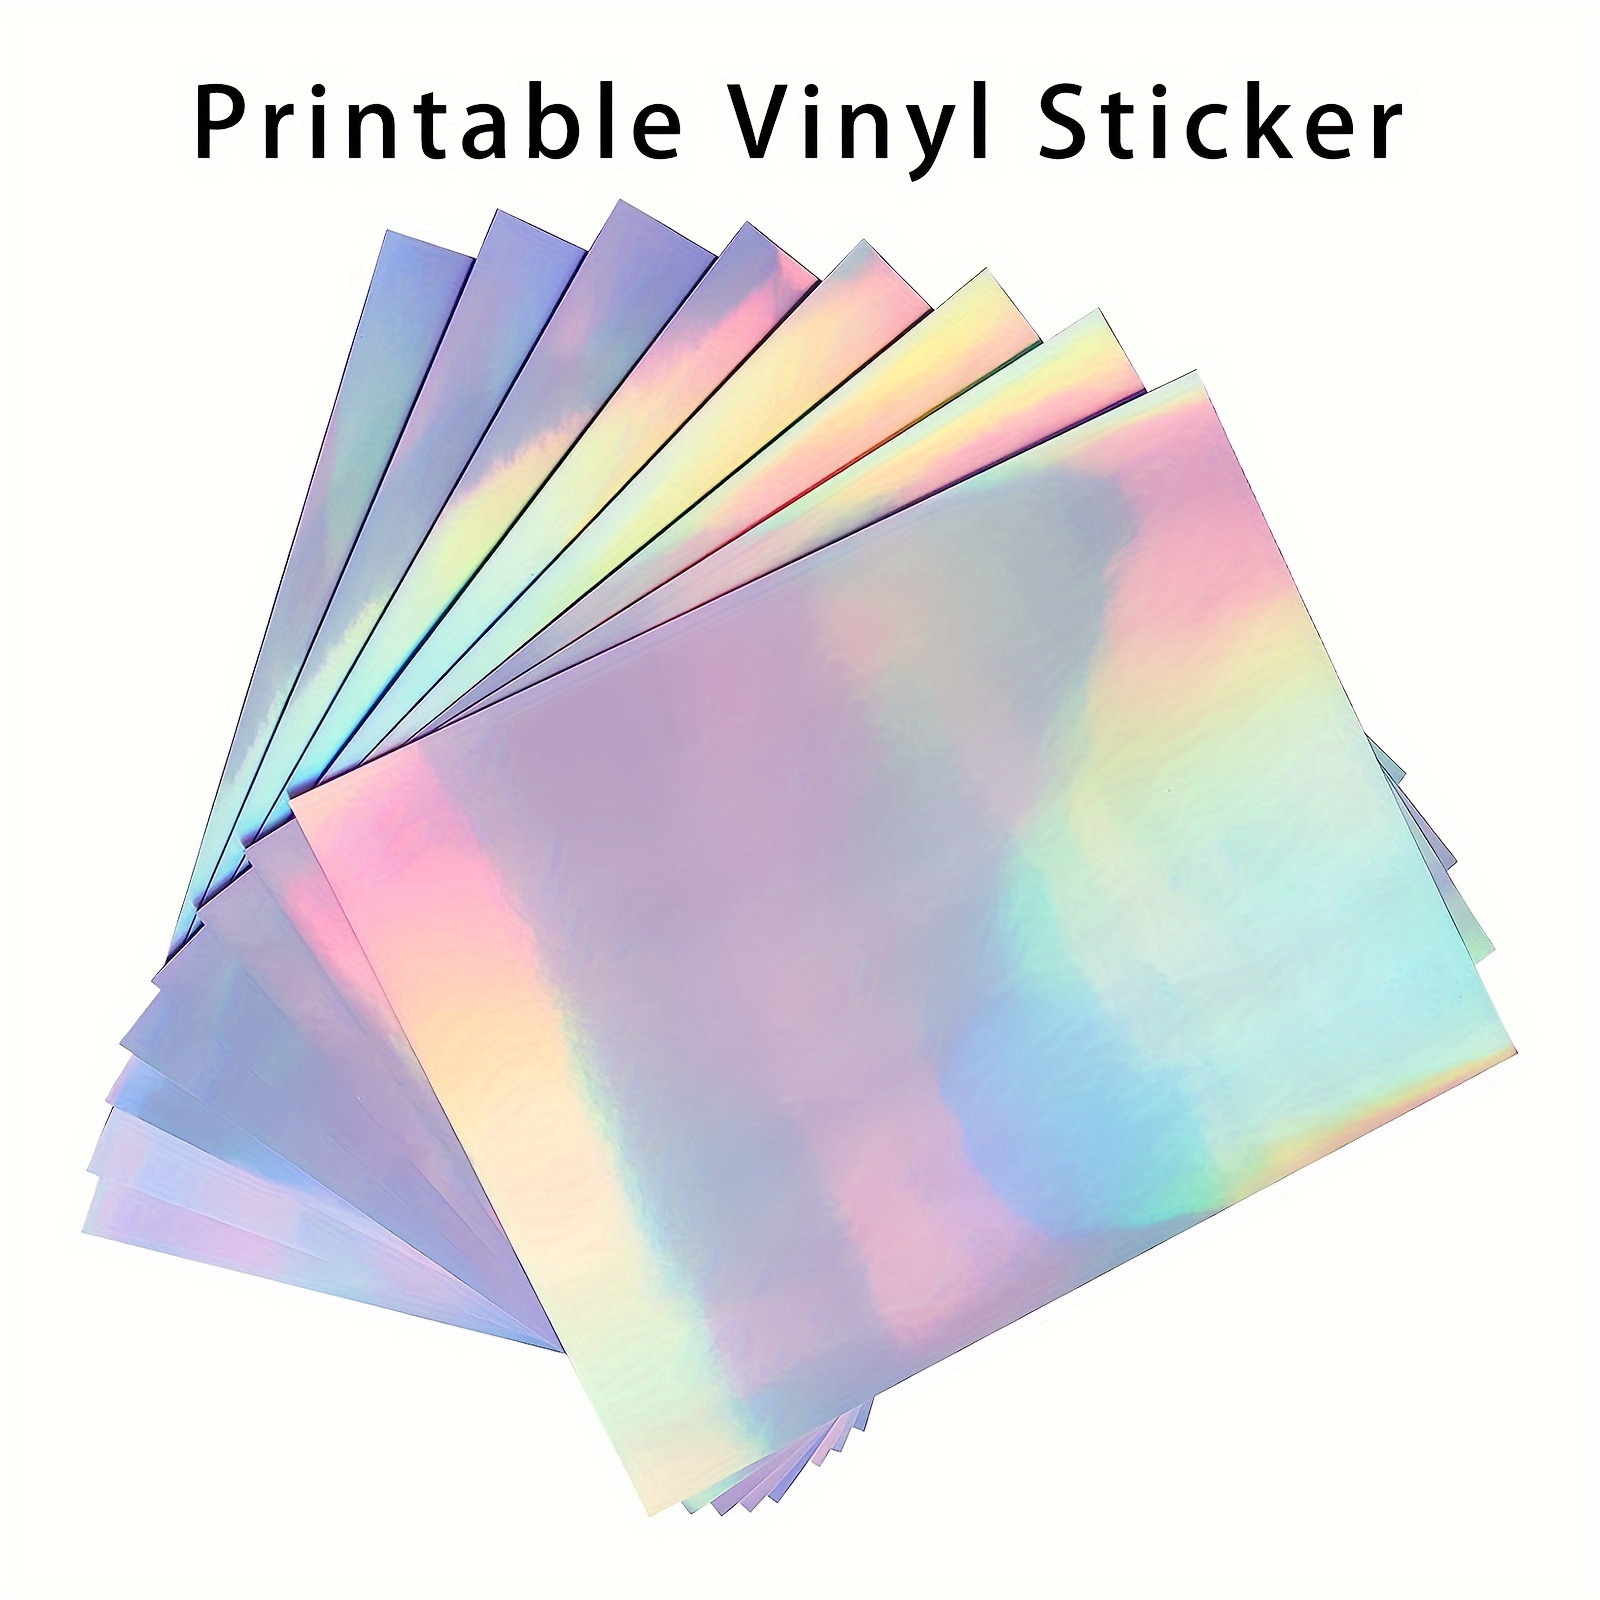 

Holographic Printable Sticker Paper For Ink Jet & Laser Printer, 10sheets Vinyl Sticker Printable Paper, Waterproof Glossy Sticker Paper Dries Quickly - 8.3 X 11.7 Inch, Rainbow